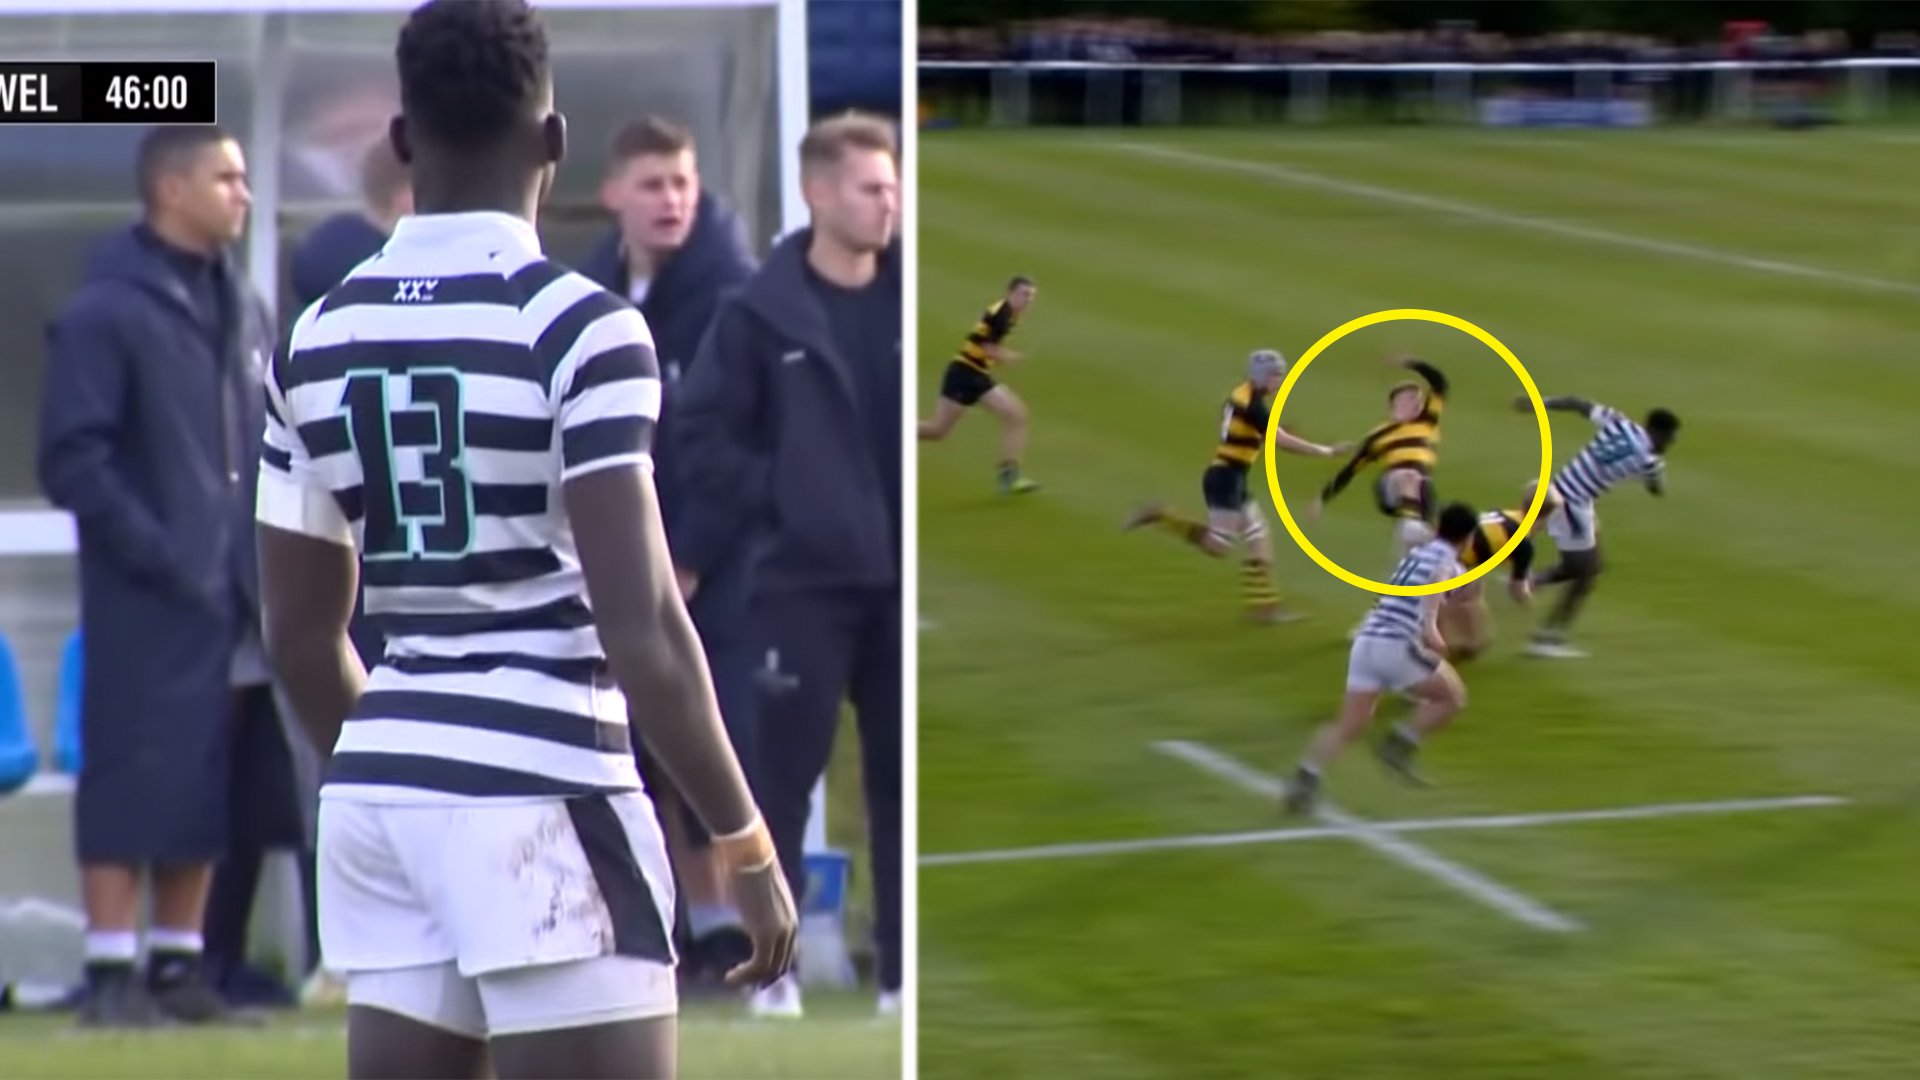 16-year-old record-breaking youngster tears apart the competition in English schoolboy game